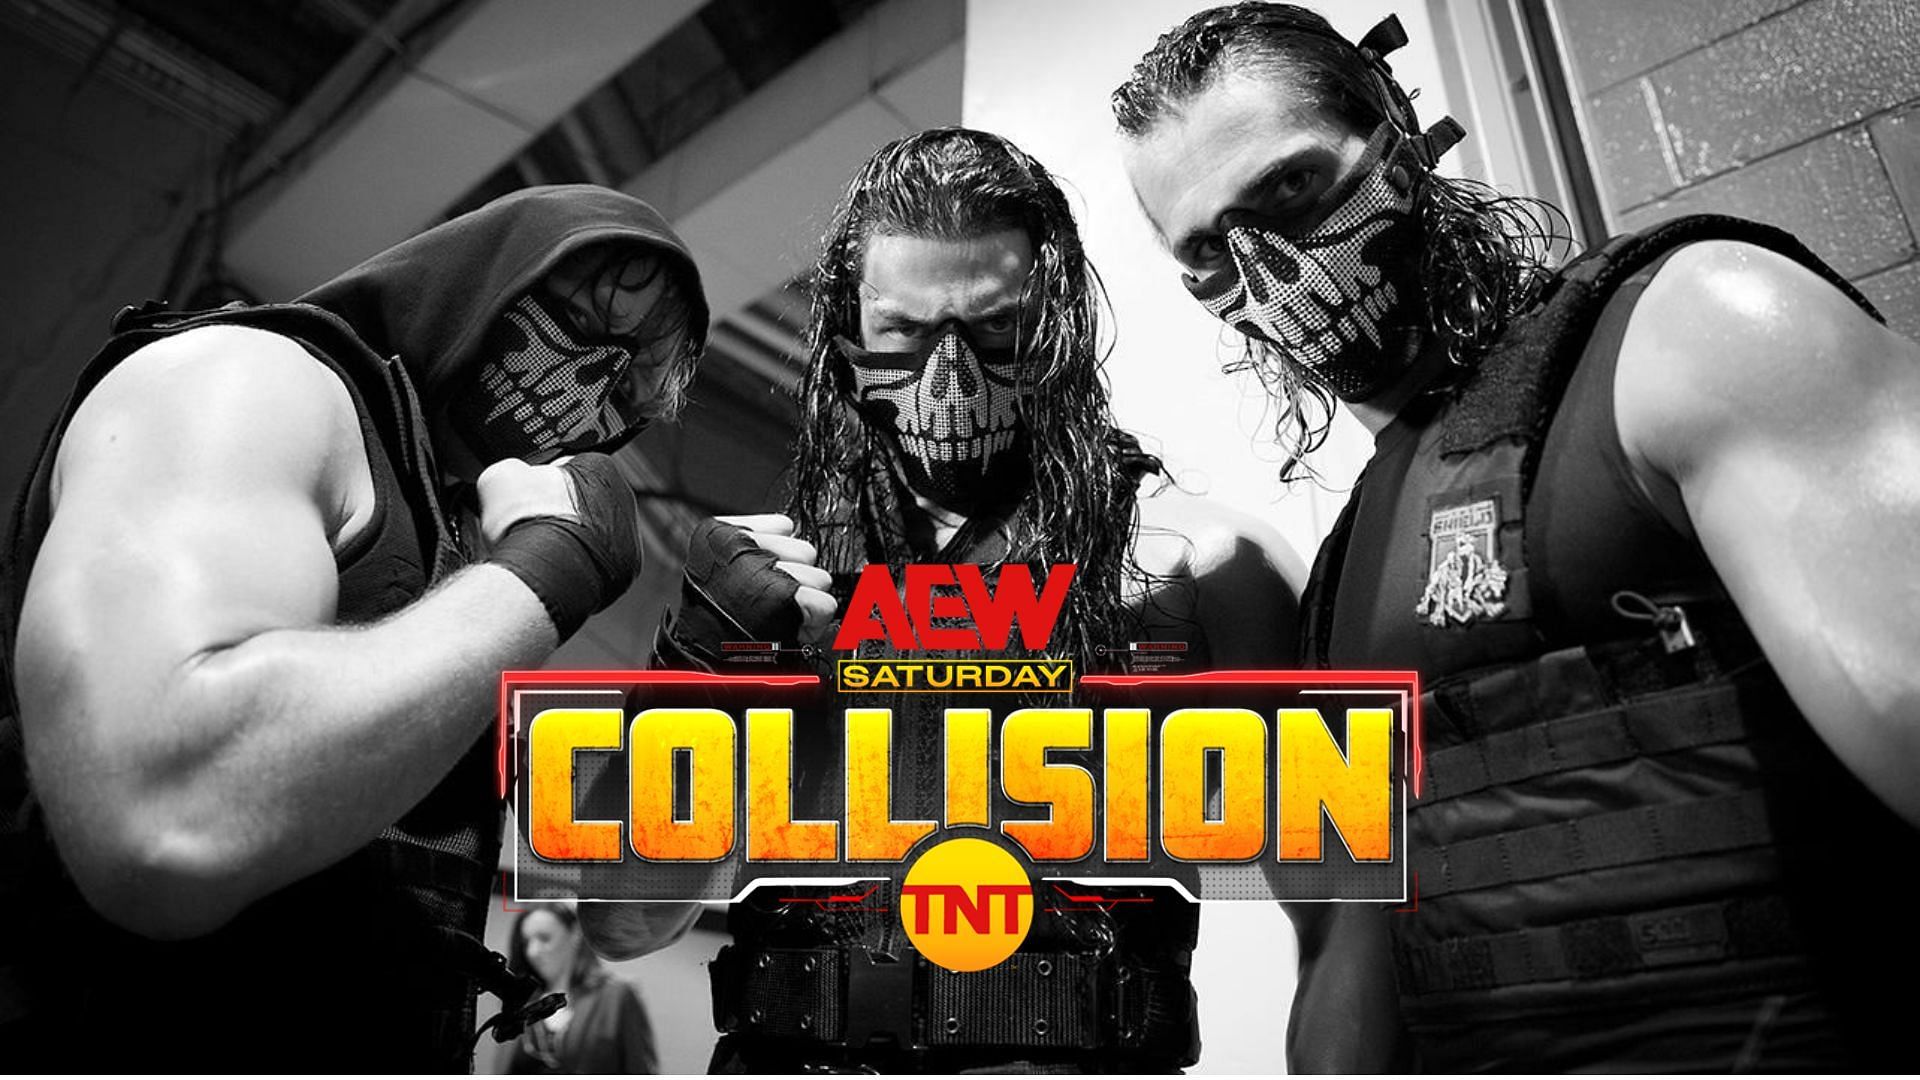 A former WWE Superstar will be backstage at AEW Collision